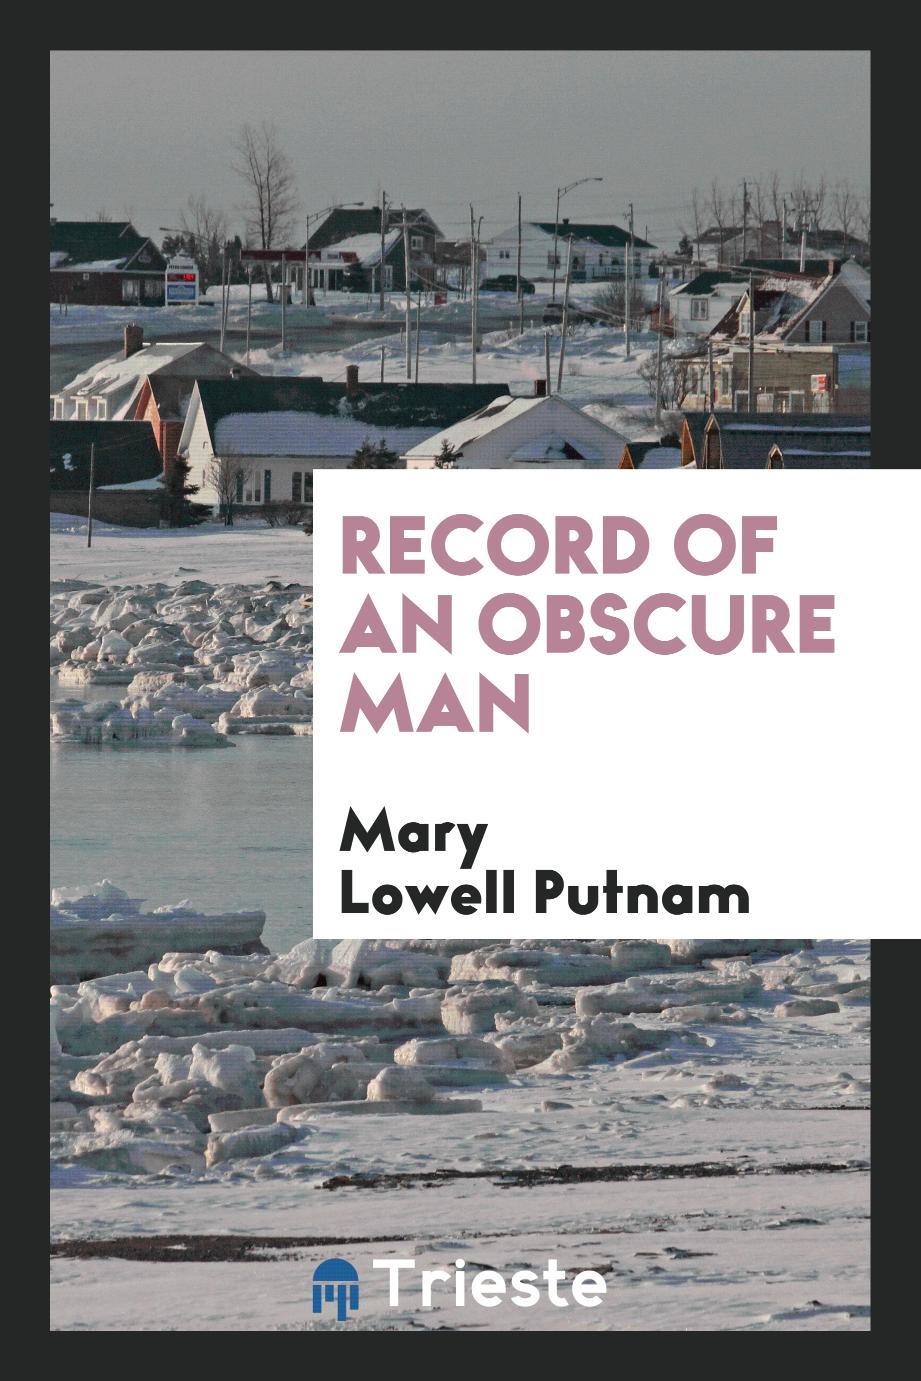 Record of an obscure man